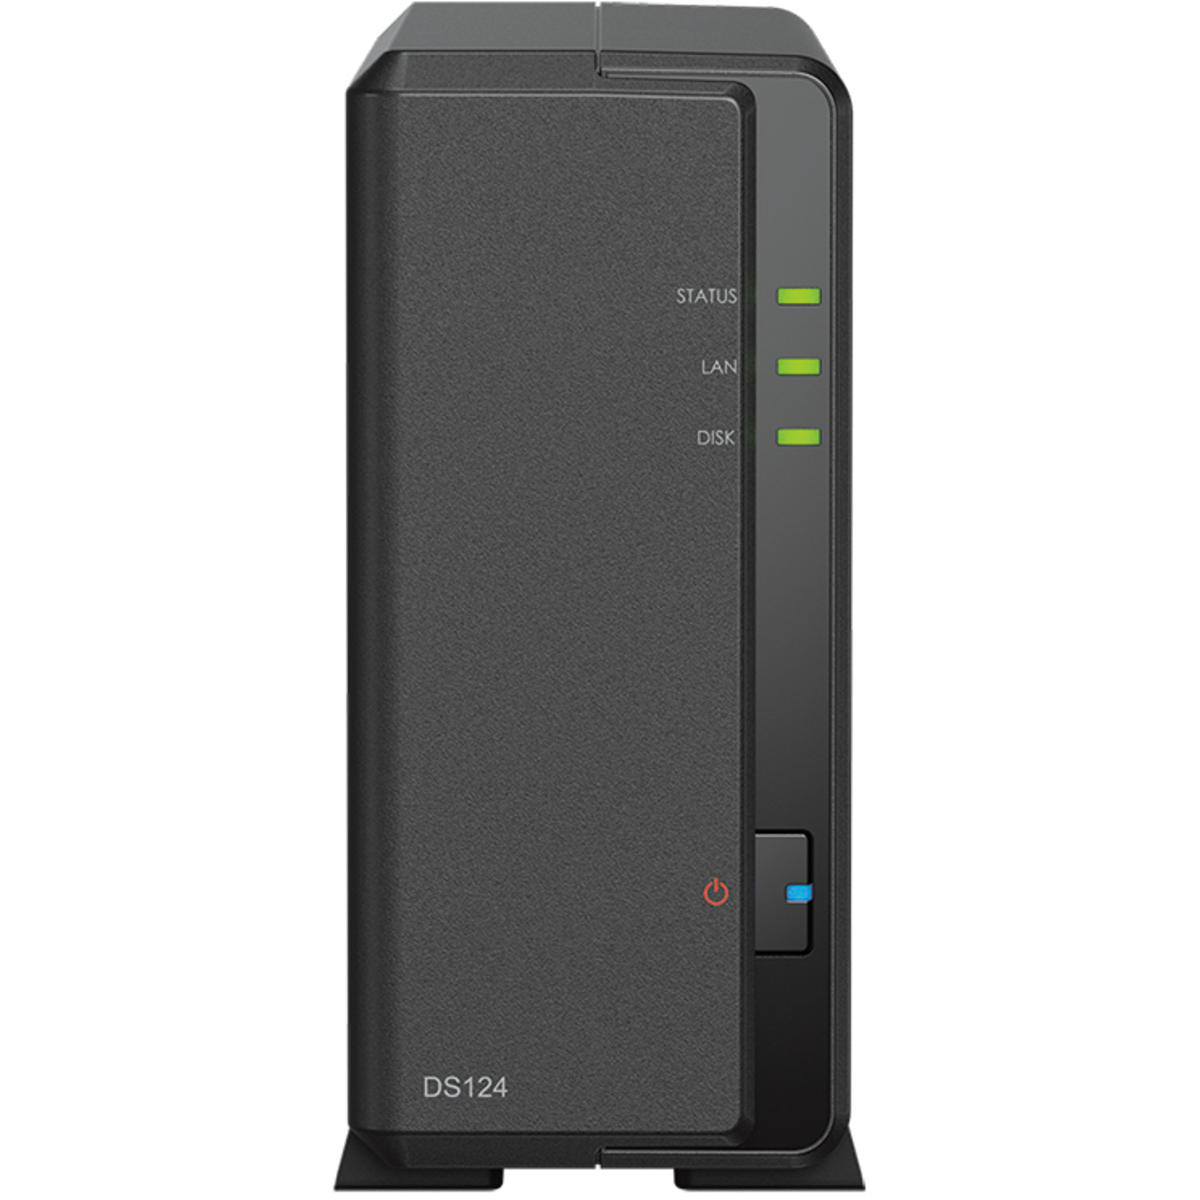 buy $730 Synology DiskStation DS124 8tb Desktop NAS - Network Attached Storage Device 1x8000gb Samsung 870 QVO MZ-77Q8T0 2.5 560/530MB/s SATA 6Gb/s SSD CONSUMER Class Drives Installed - Burn-In Tested - ON SALE - nas headquarters buy network attached storage server device das new raid-5 free shipping simply usa DiskStation DS124